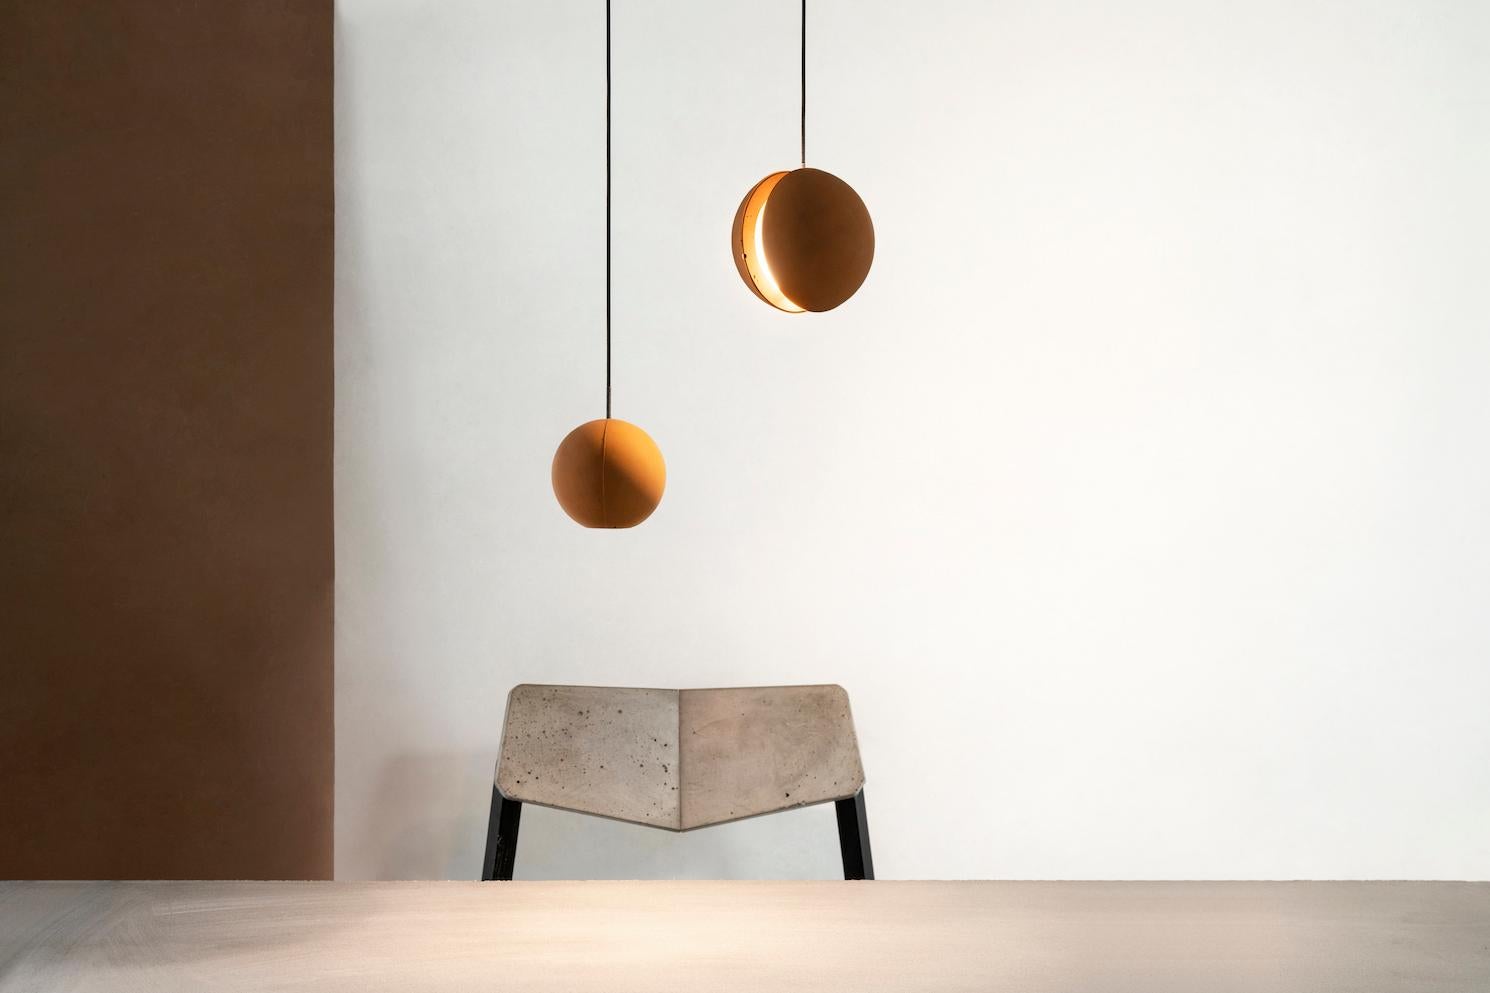 Pendant lamp 'E-mars' by Nongzao x Bentu Design.
Material: Terracotta 
Color: Earthy orange 

Measures: 10.2 cm high, 9.8 cm diameter
Wire: 3 meters (black)
Lamp type: AC 100-240V 50-60Hz 9W - Comptable with US electric